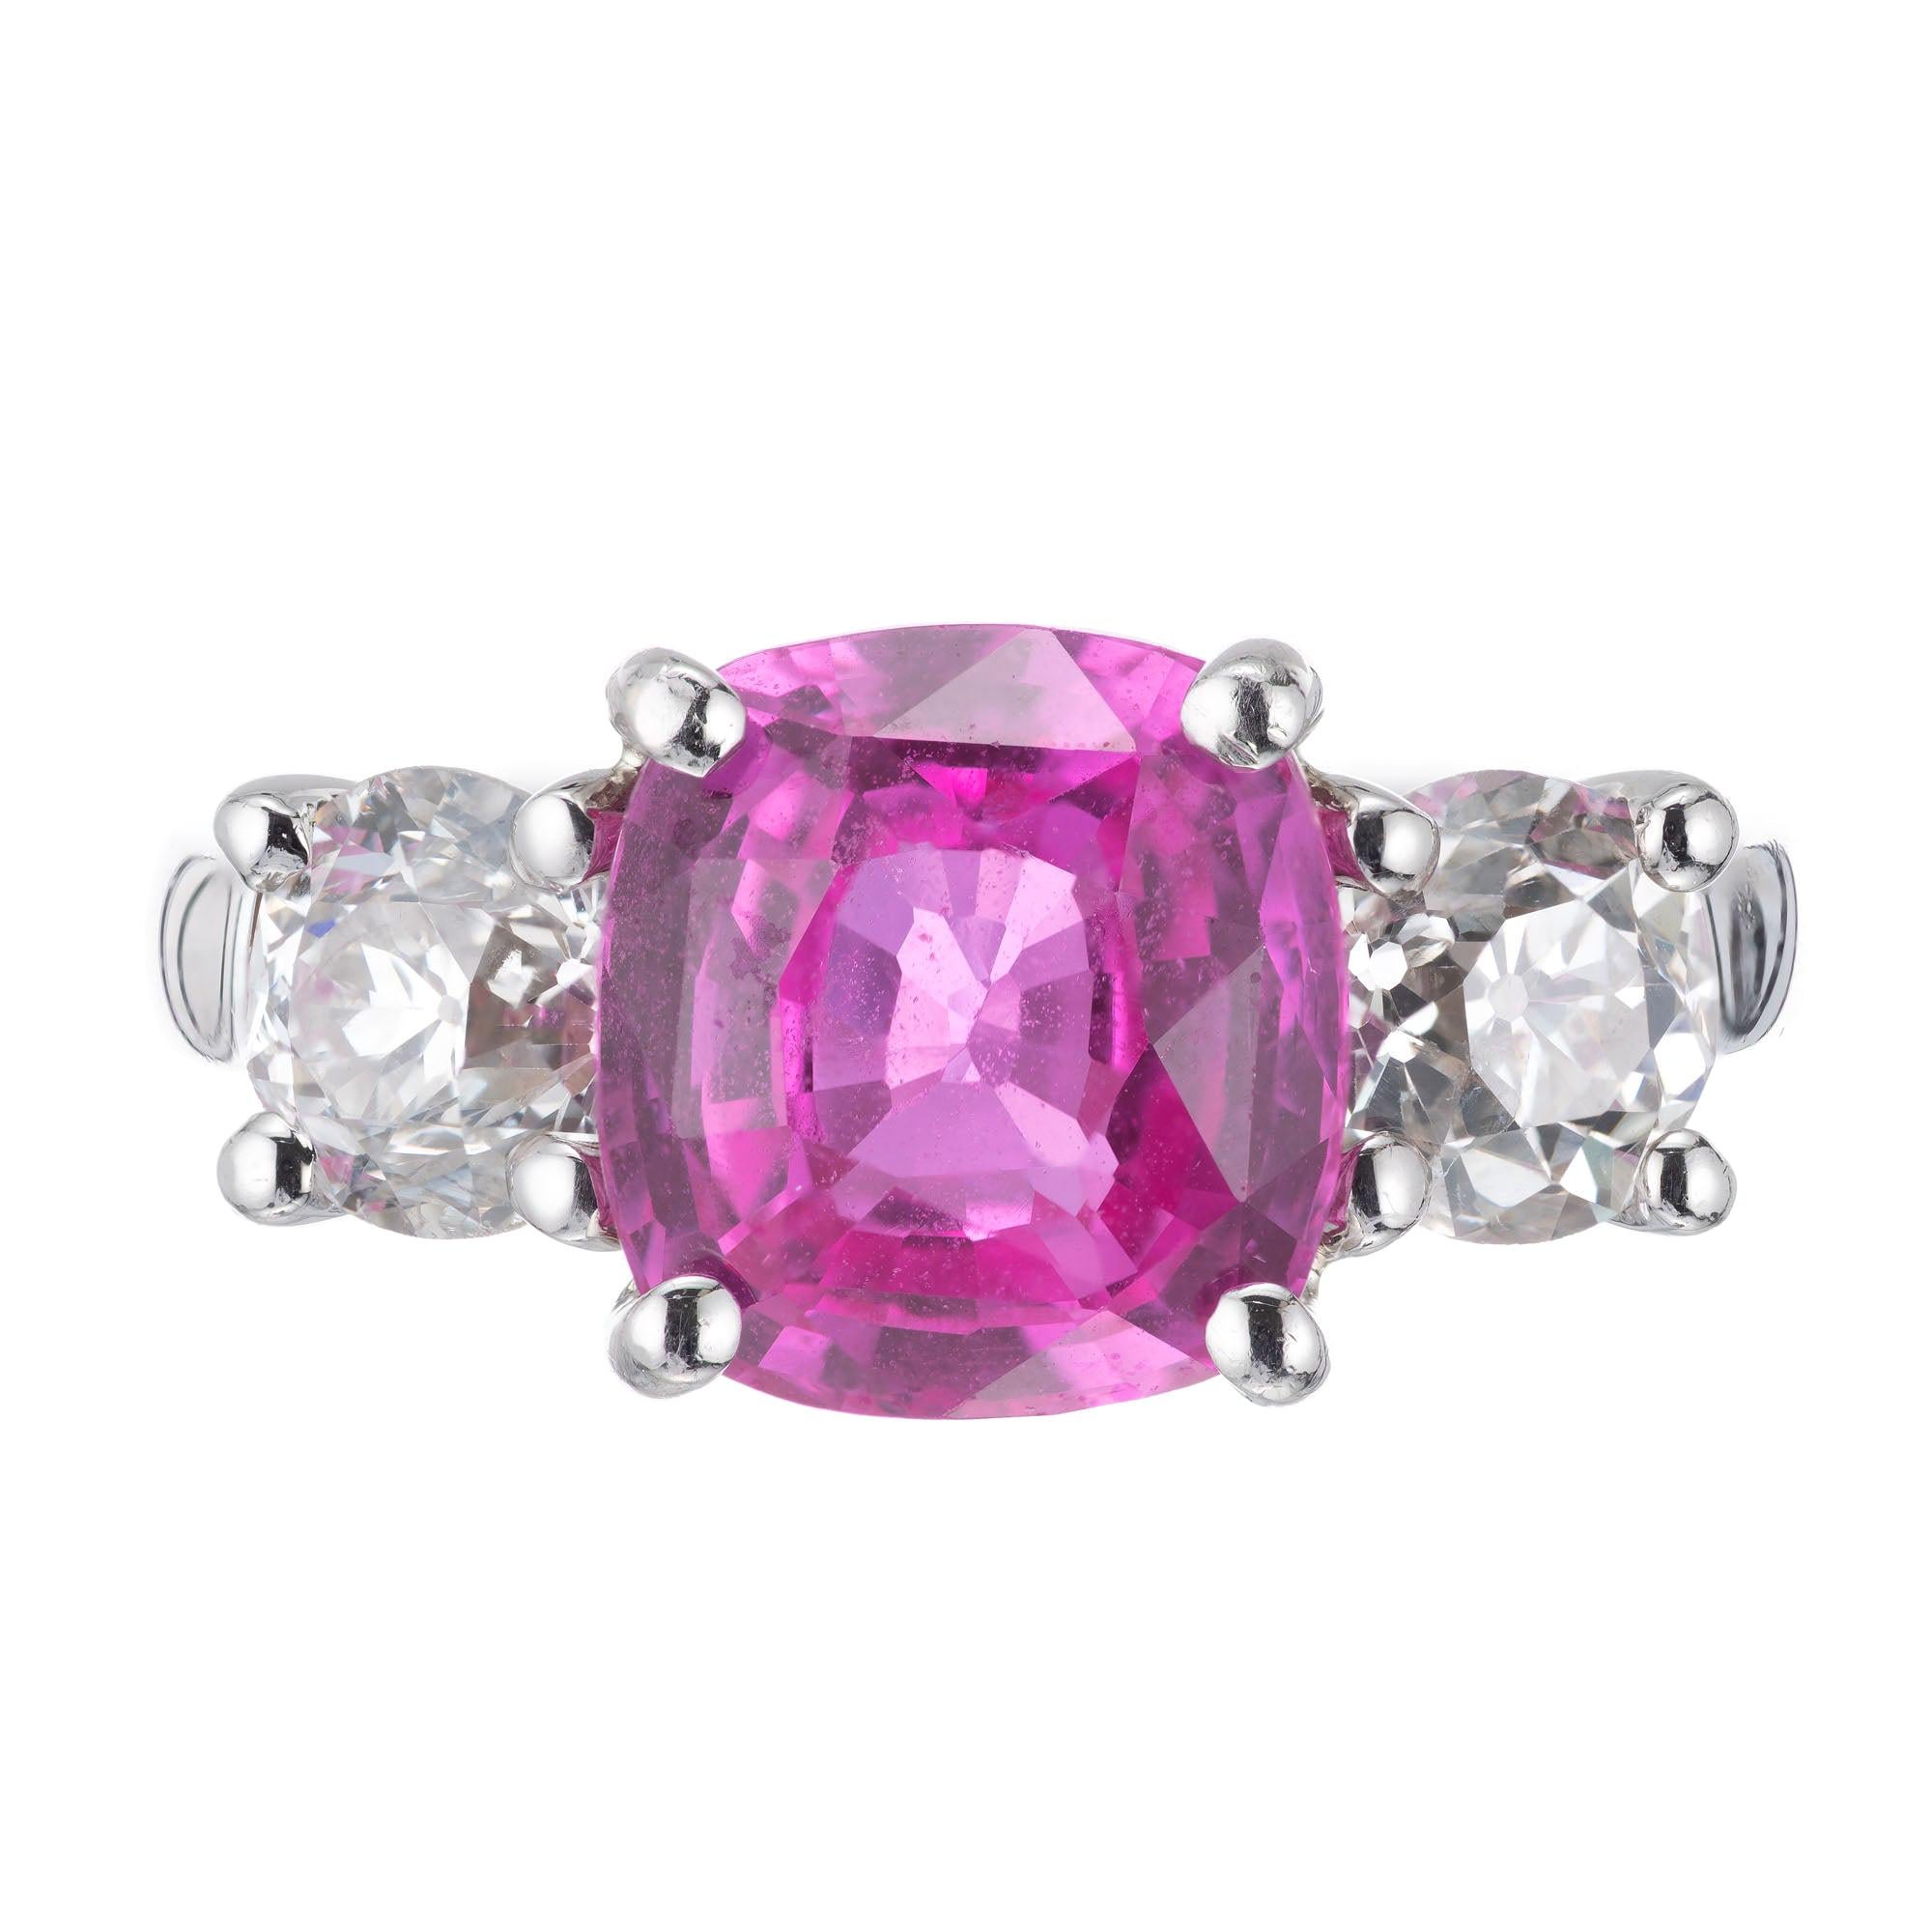 Peter Suchy GIA 4.02 Carat Pink Sapphire Diamond Platinum Engagement Ring For Sale